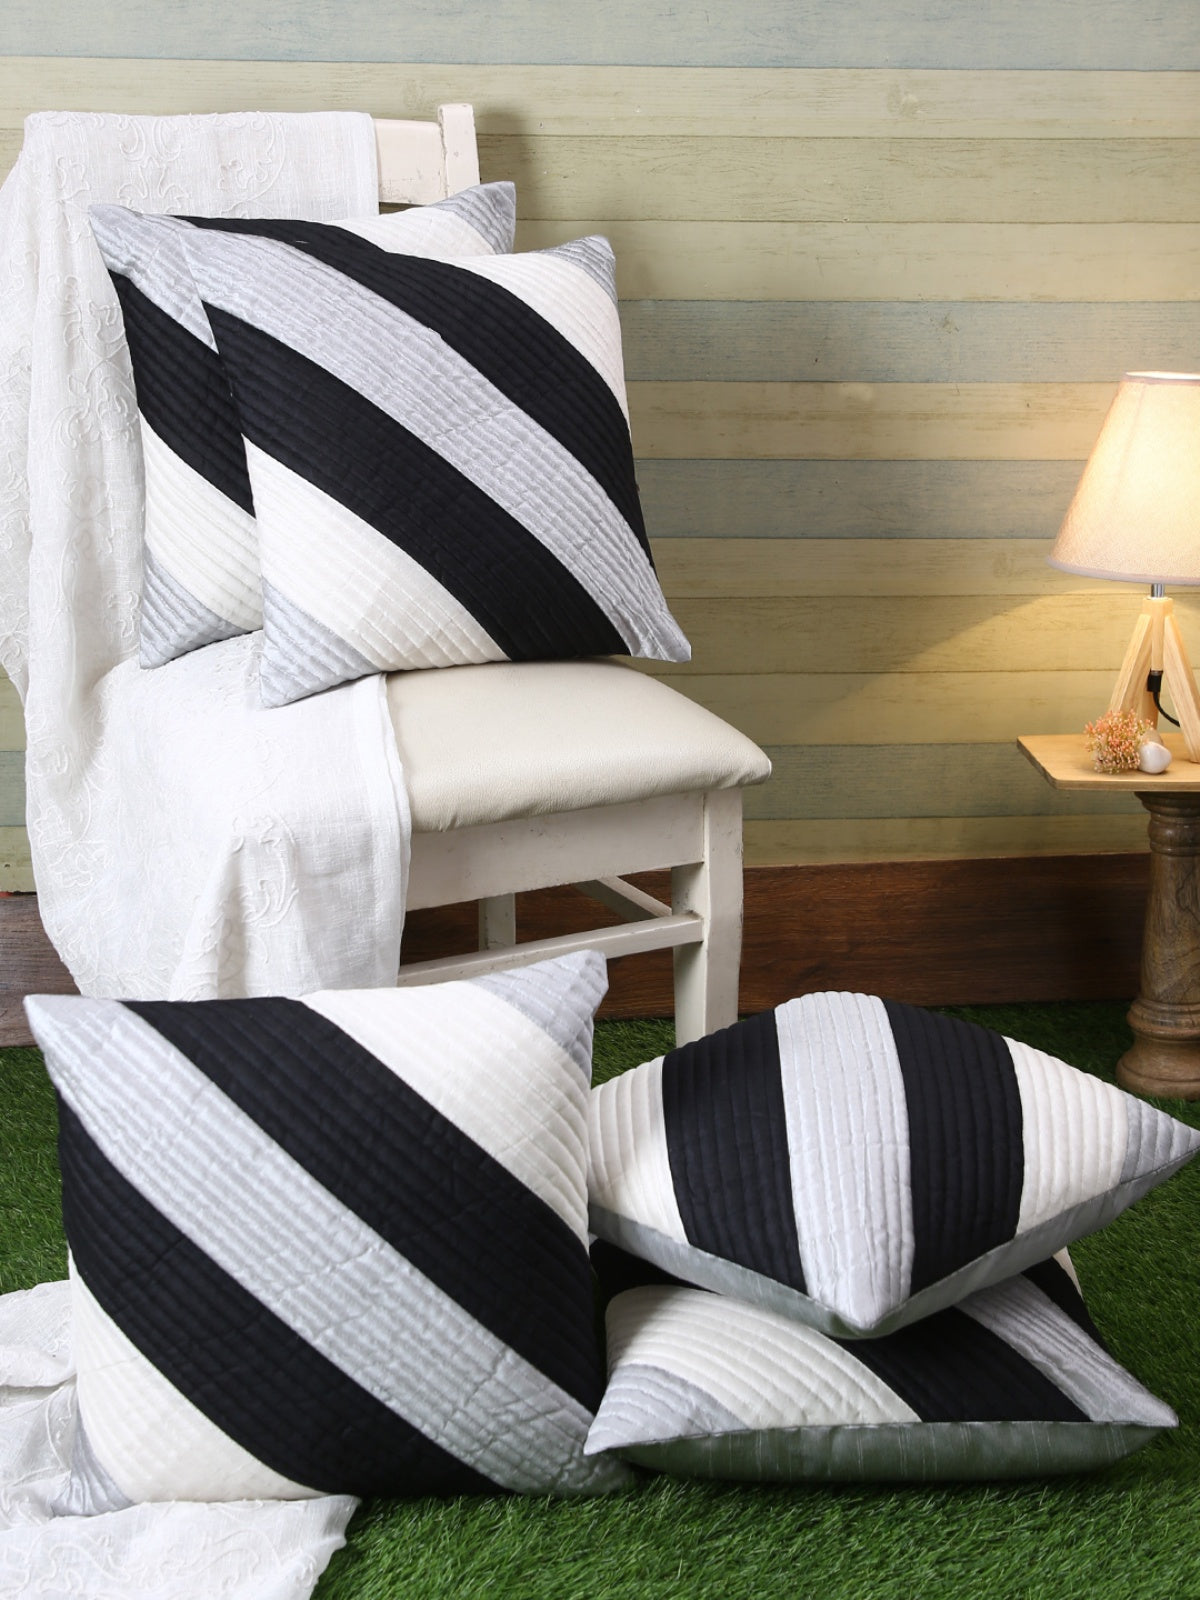 Striped Printed Polyester Cushion Cover Set of 5 - White & Navy Blue